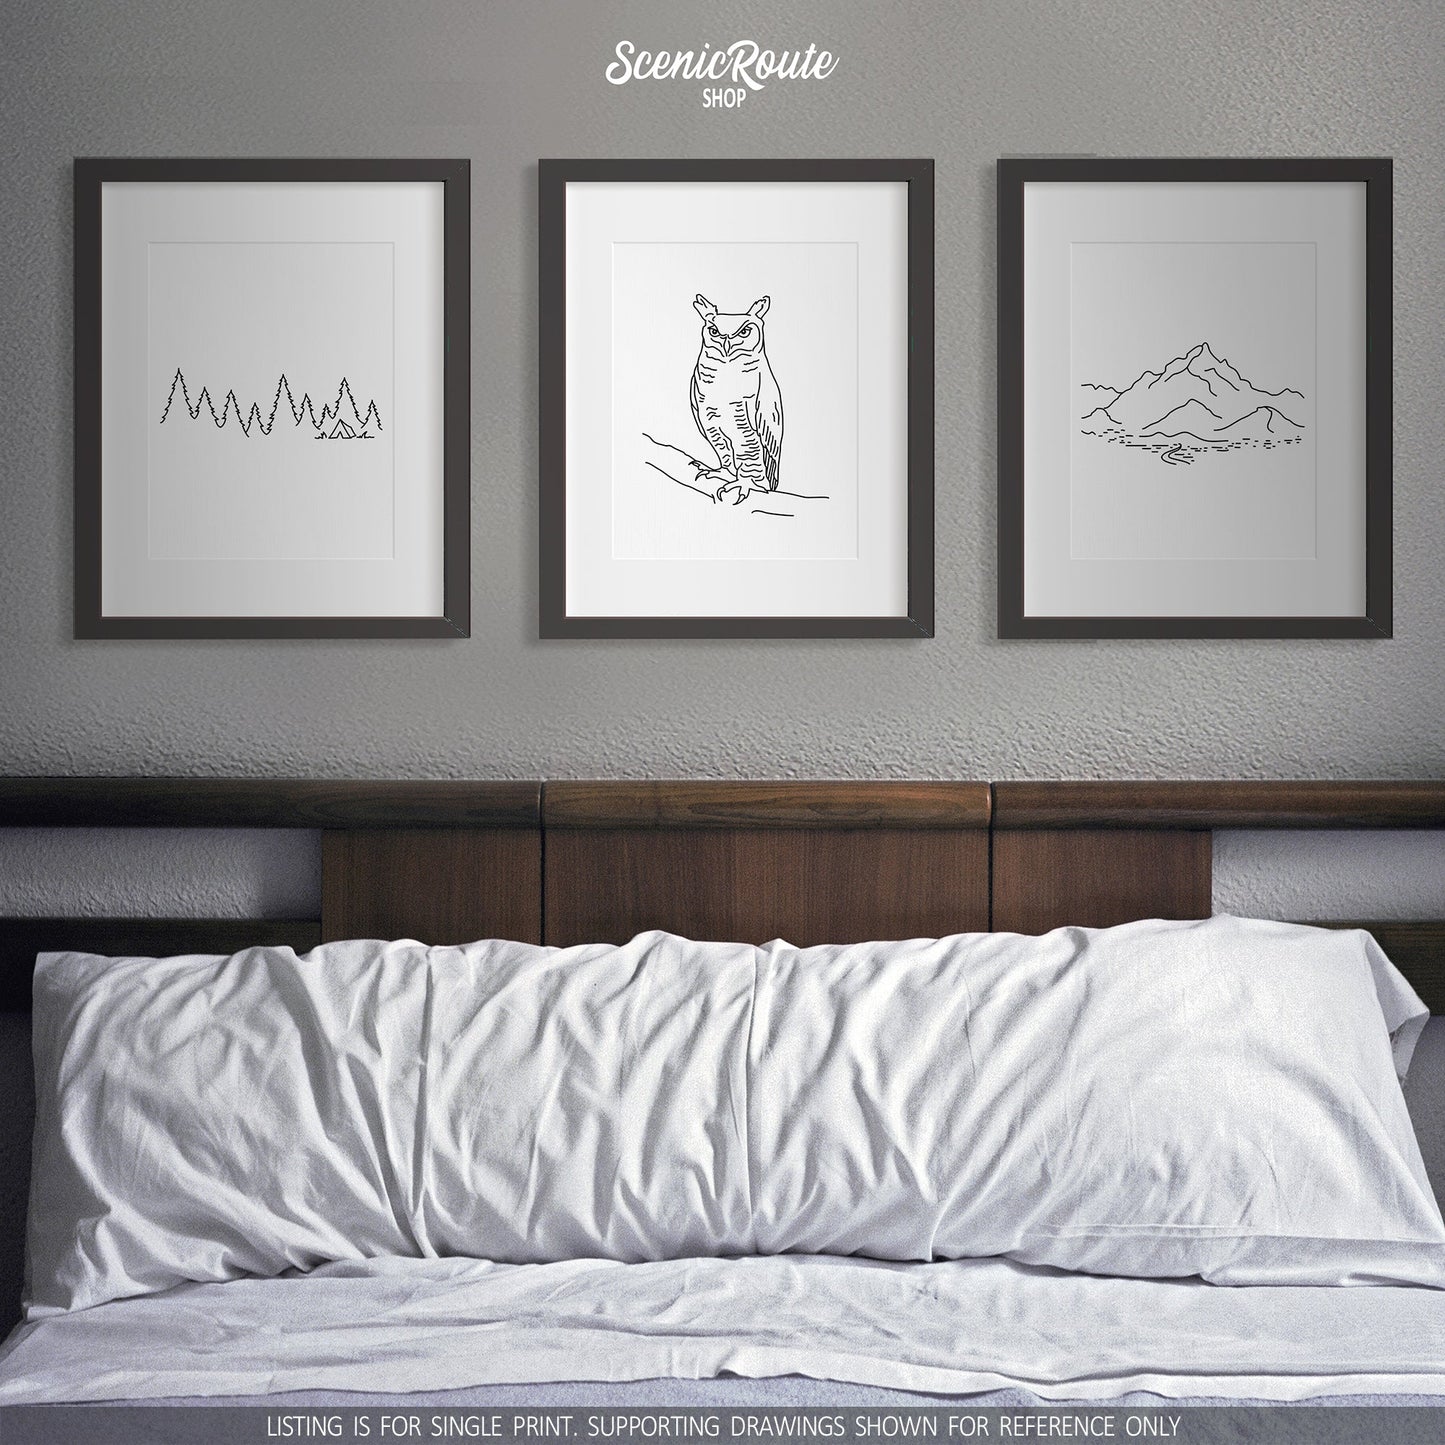 A group of three framed drawings on a white wall above a bed. The line art drawings include Camping, an Owl, and Piestewa Peak